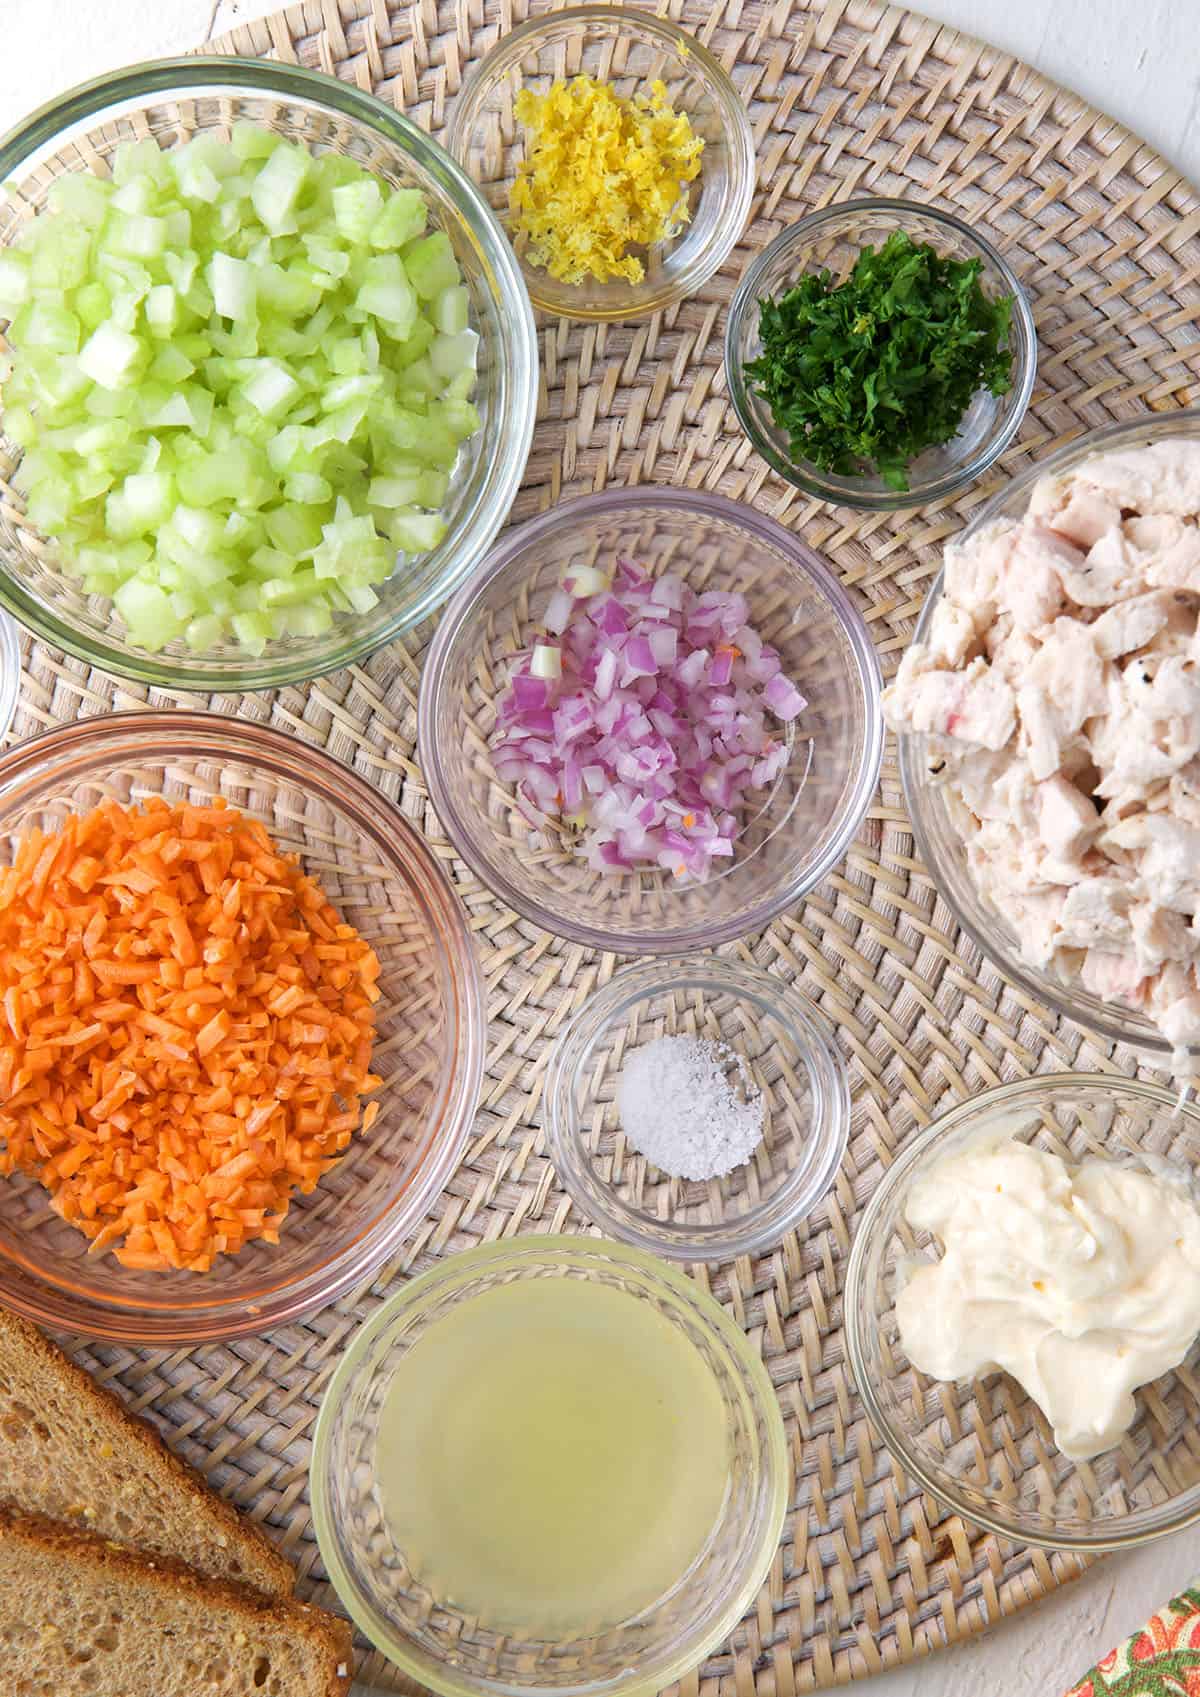 All of the ingredients for chicken salad are placed on a round place mat. 